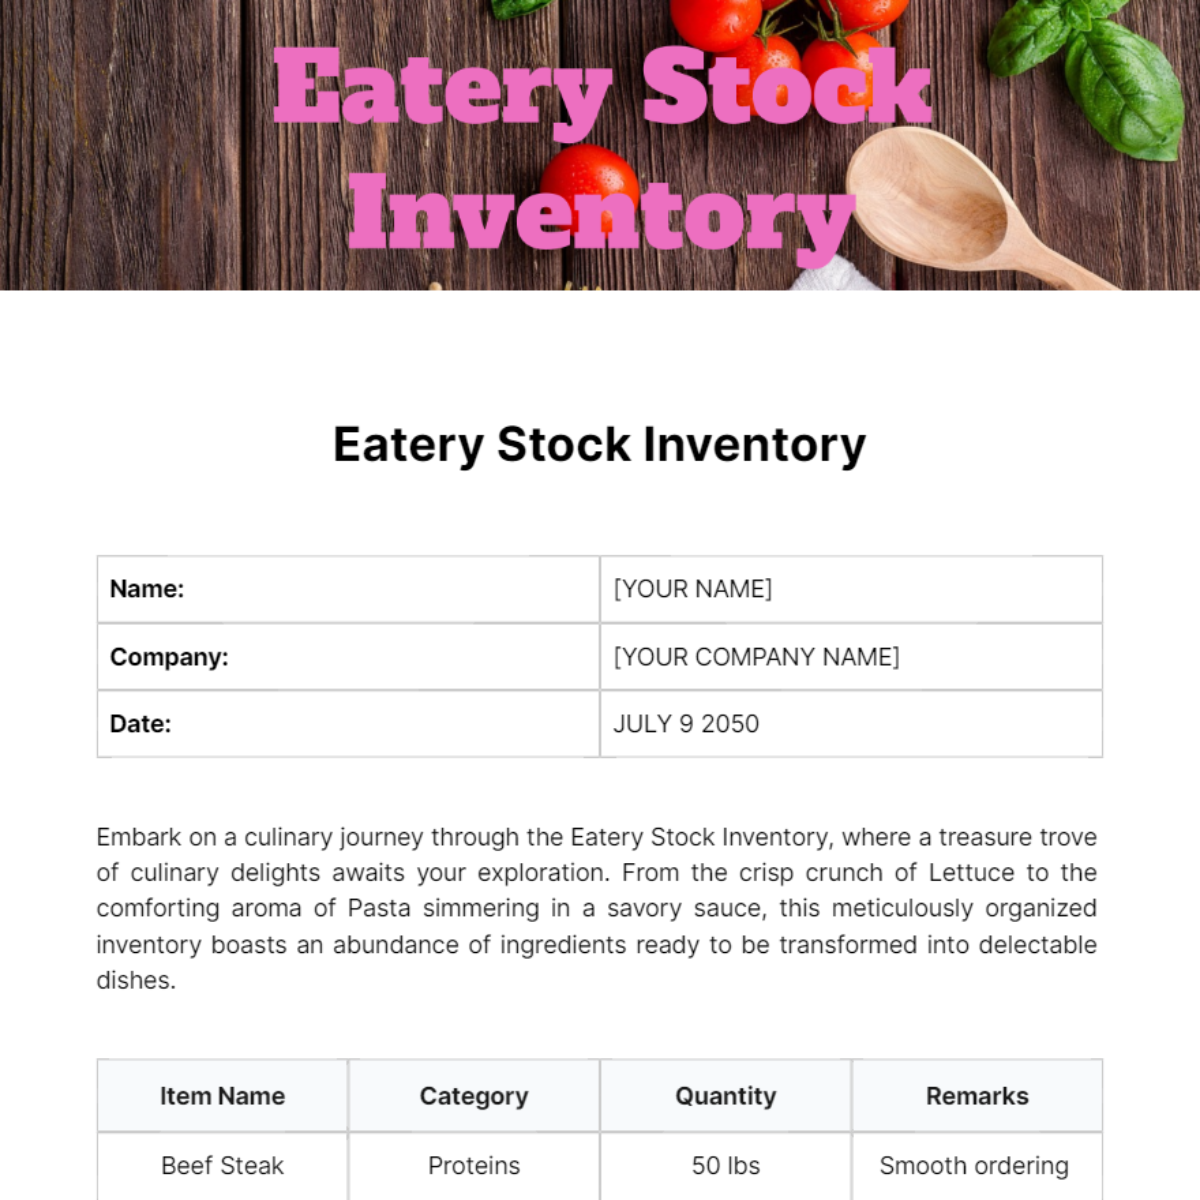 Free Eatery Stock Inventory Template